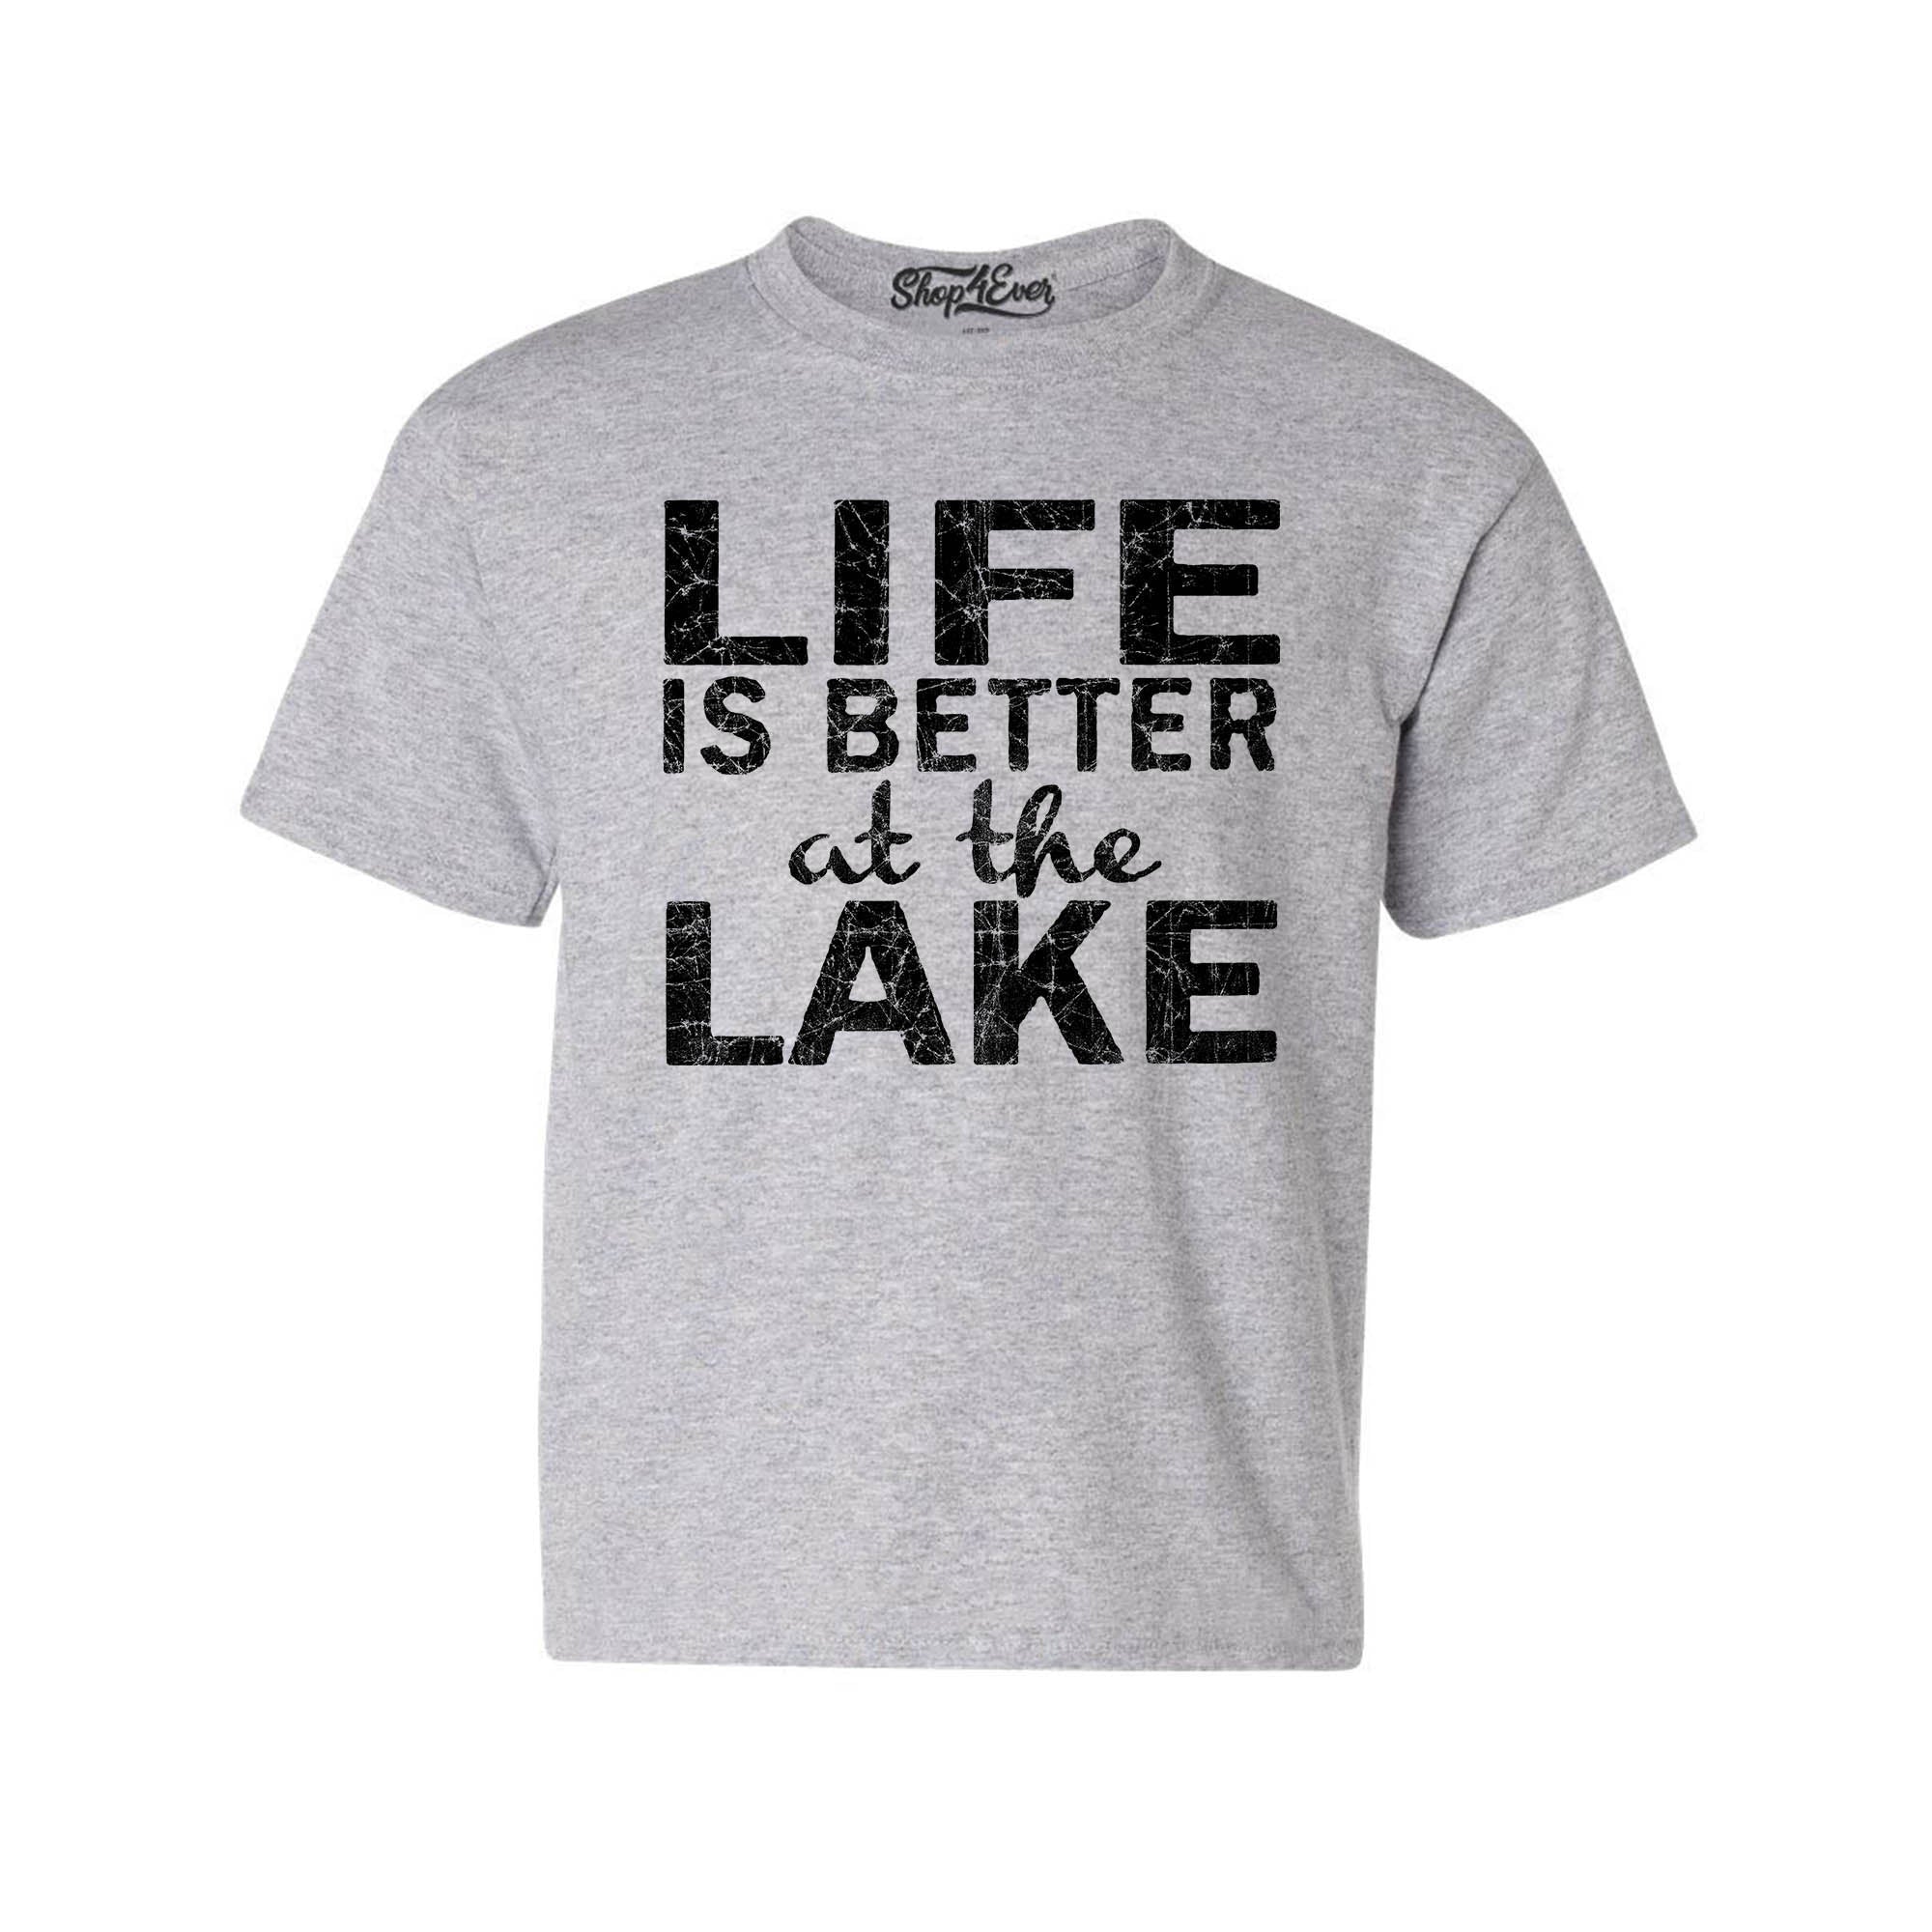 Life is Better at The Lake Black Youth's T-Shirt Sayings Kids Child Tee Shirts